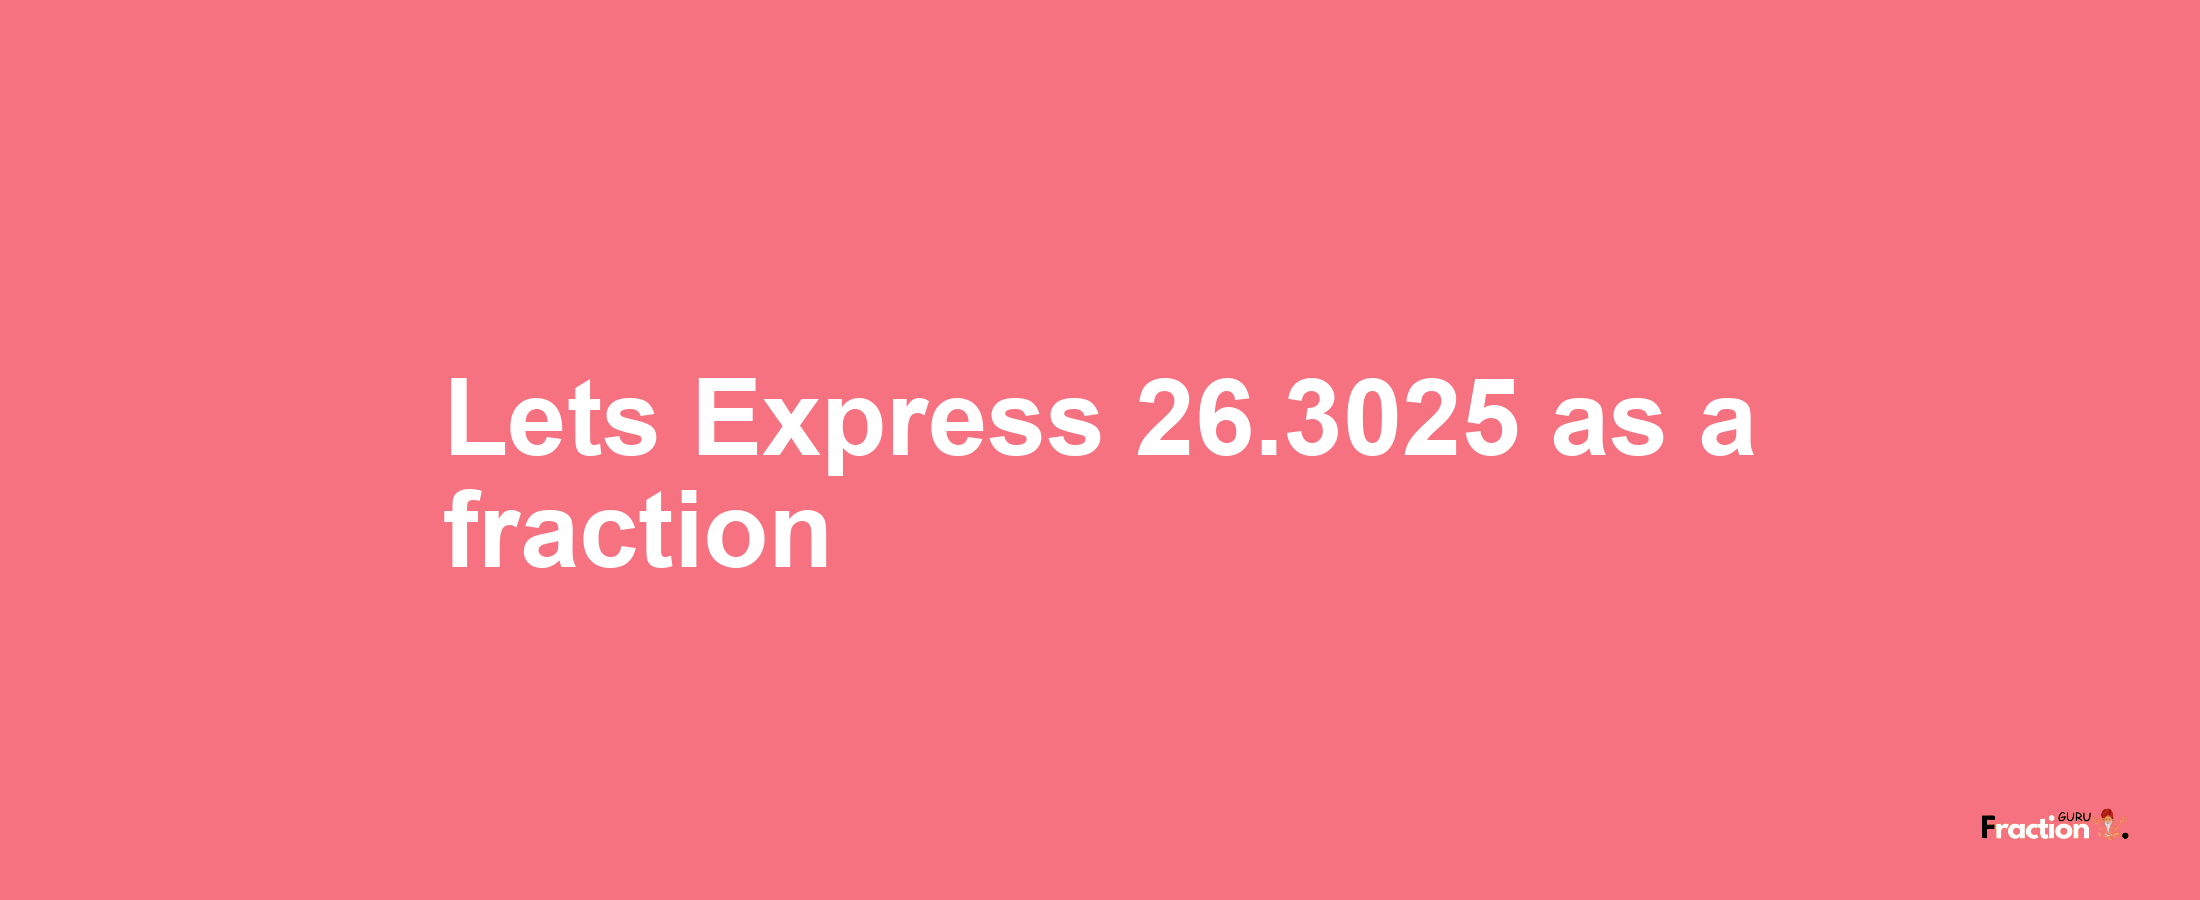 Lets Express 26.3025 as afraction